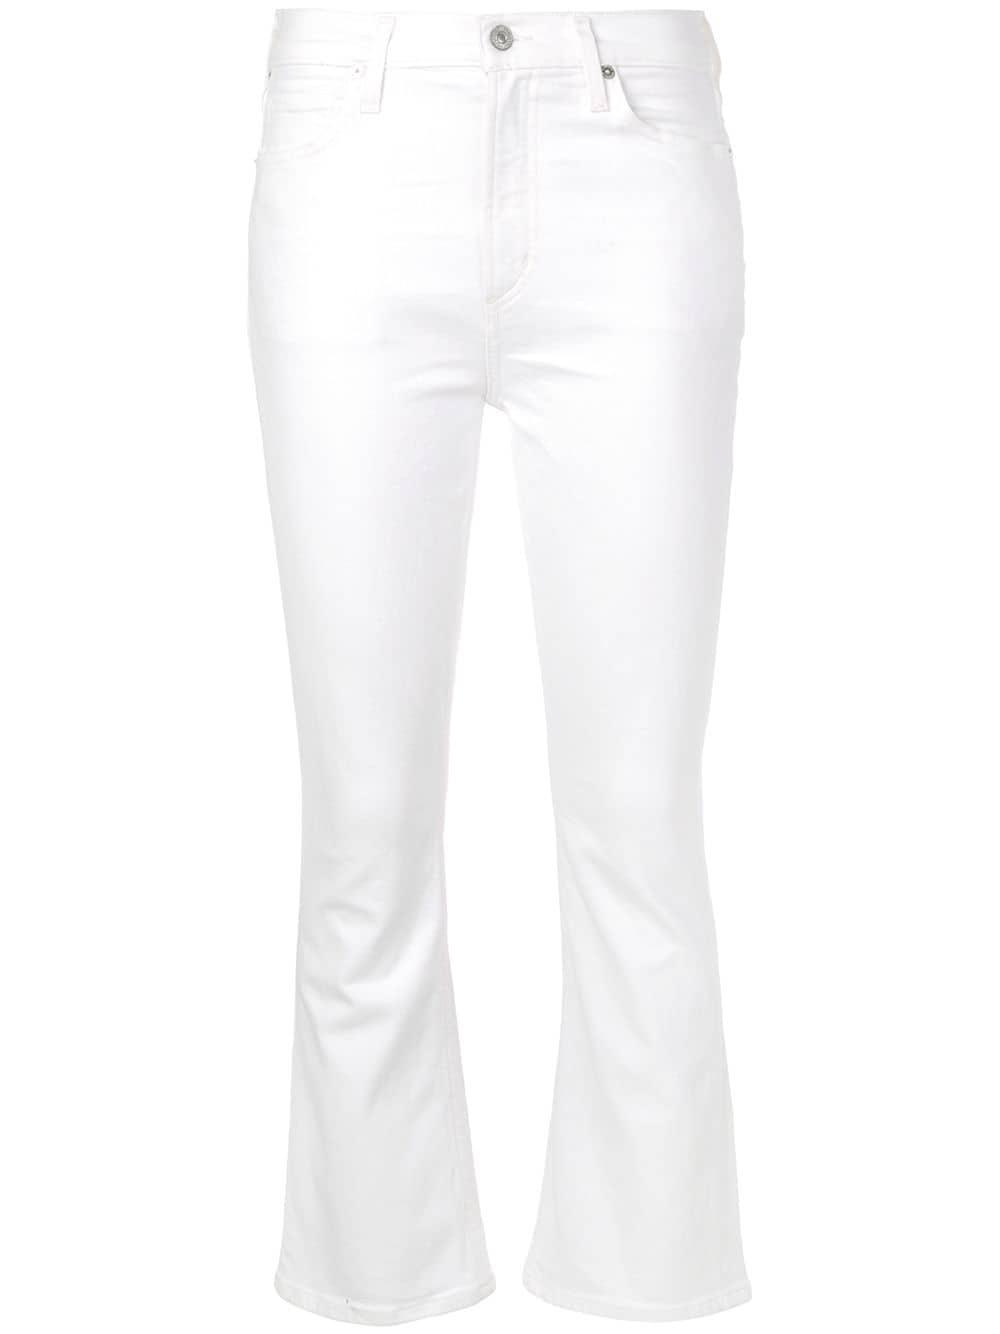 Citizens of Humanity Denim Cropped Flared Jeans in White - Lyst